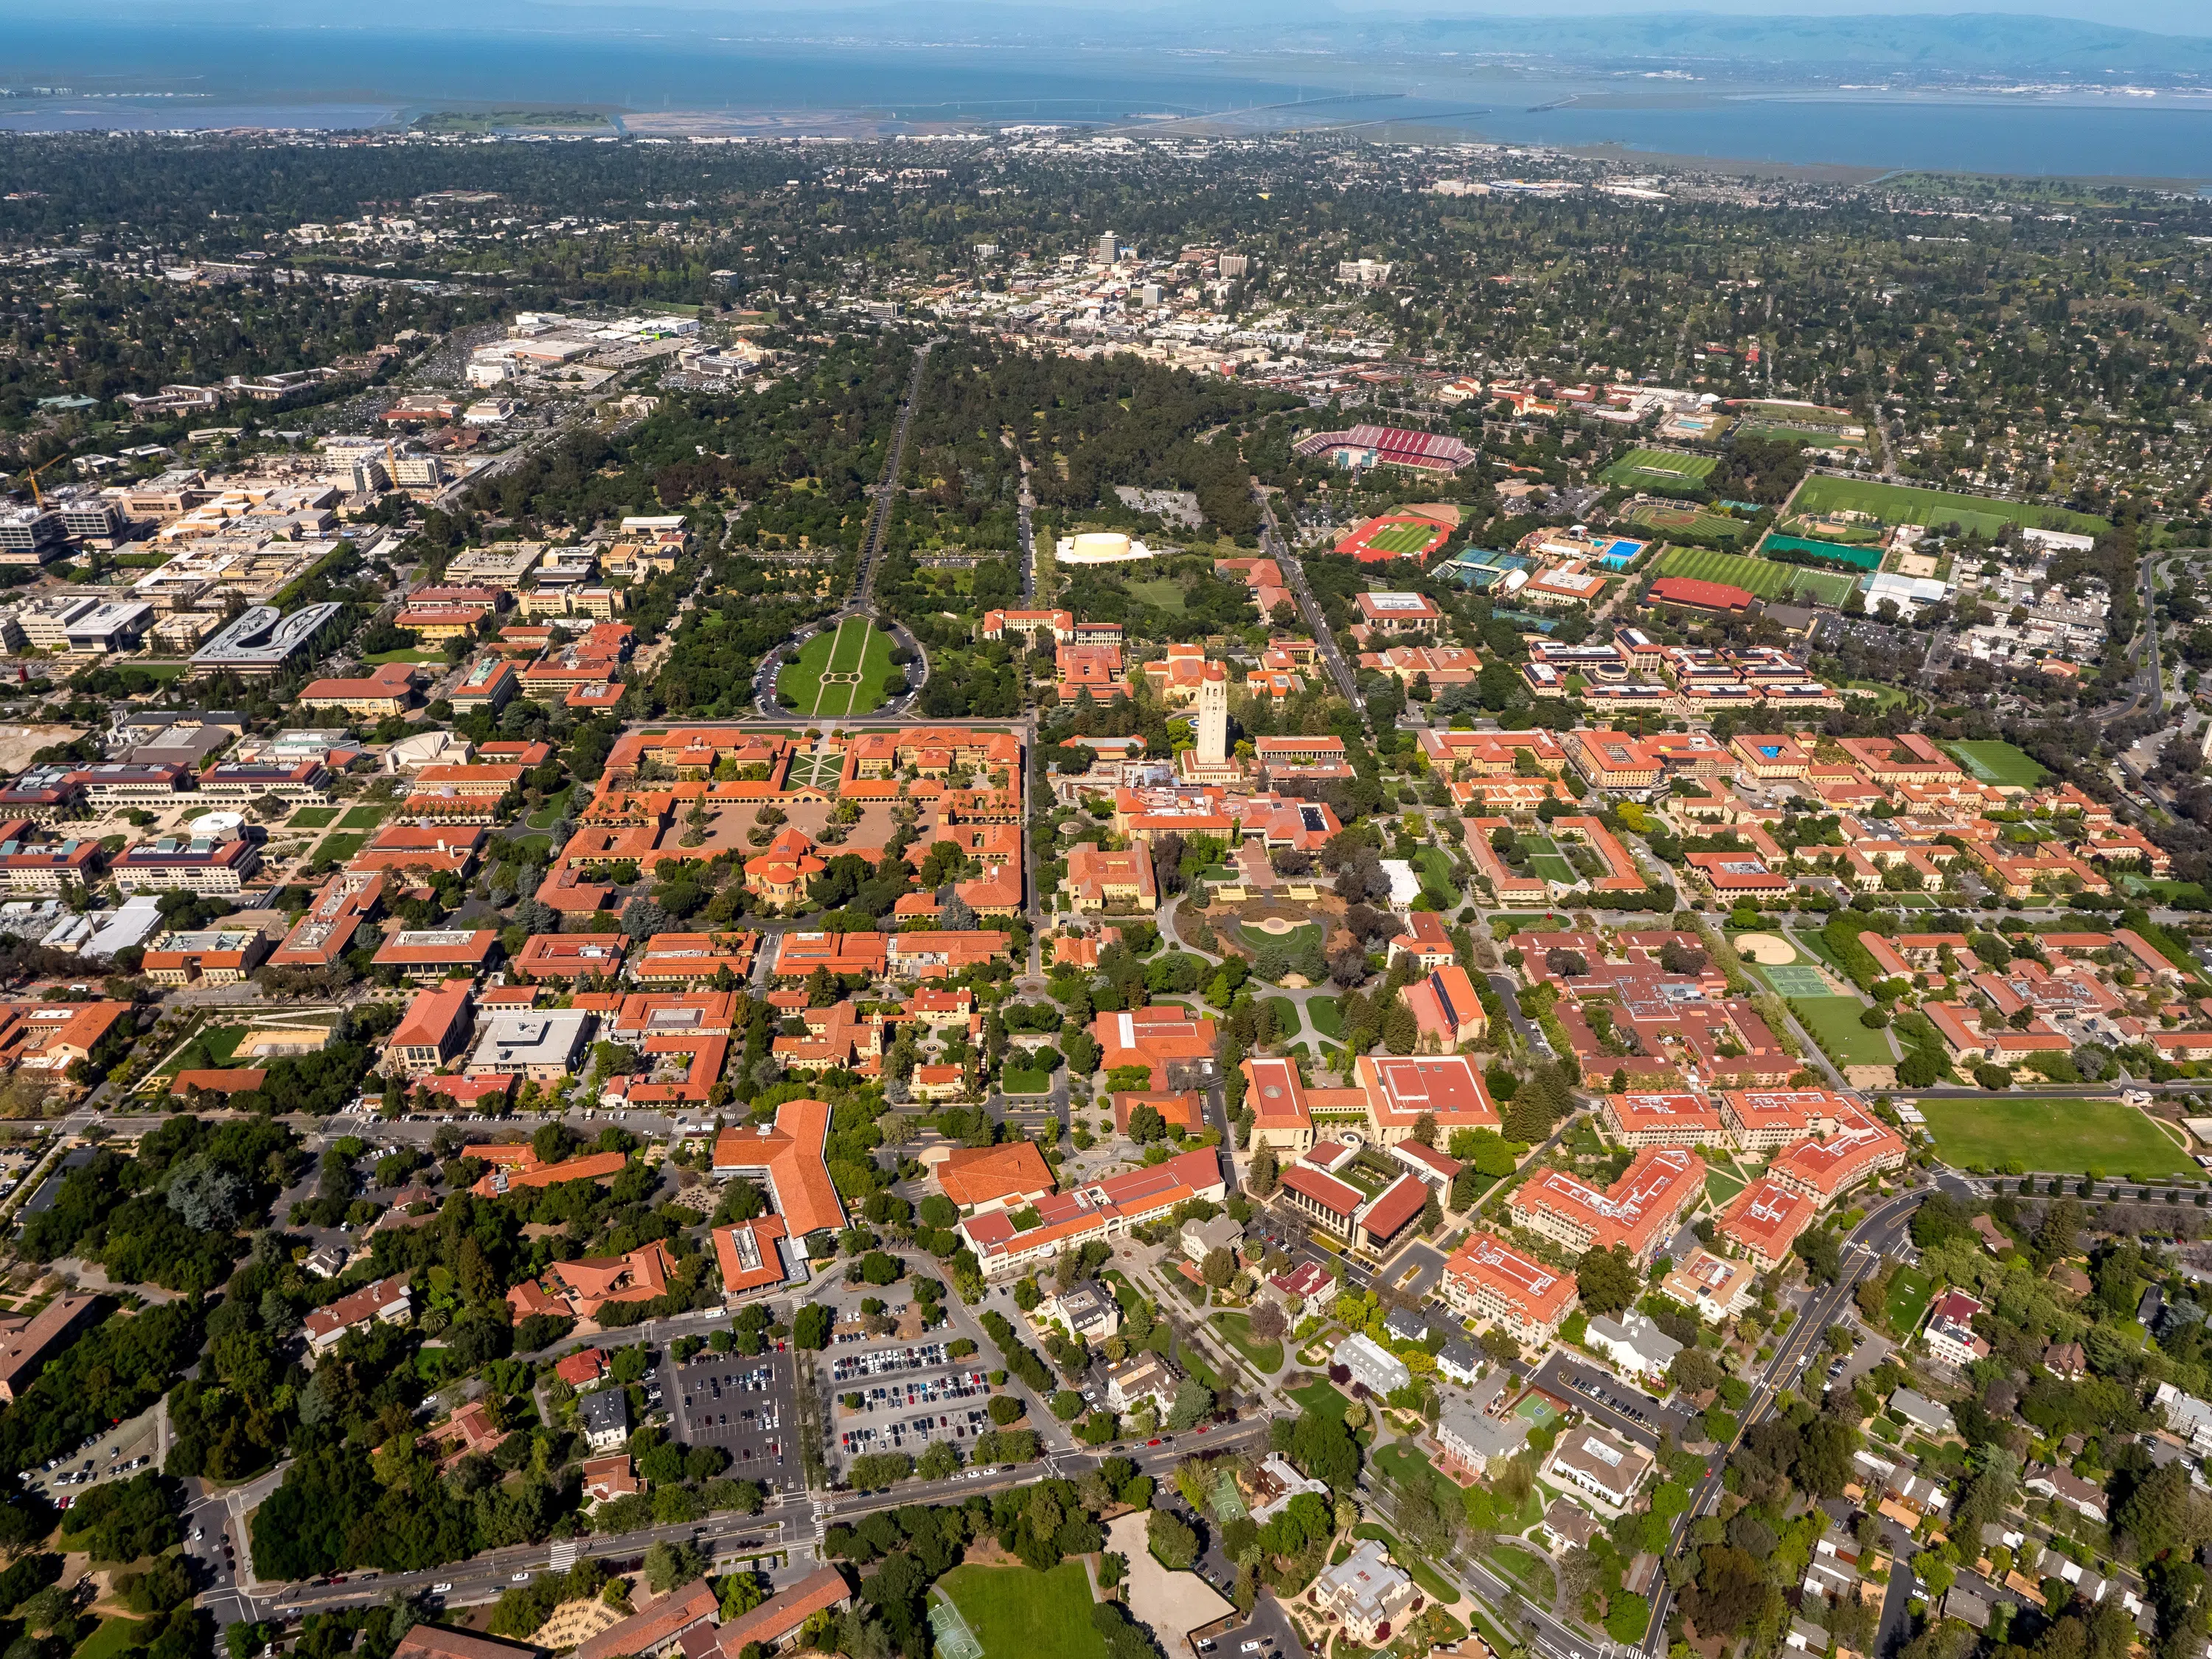 Aerial View of Stanford's central campus, with neighboring communities and San Francisco Bay in the background.